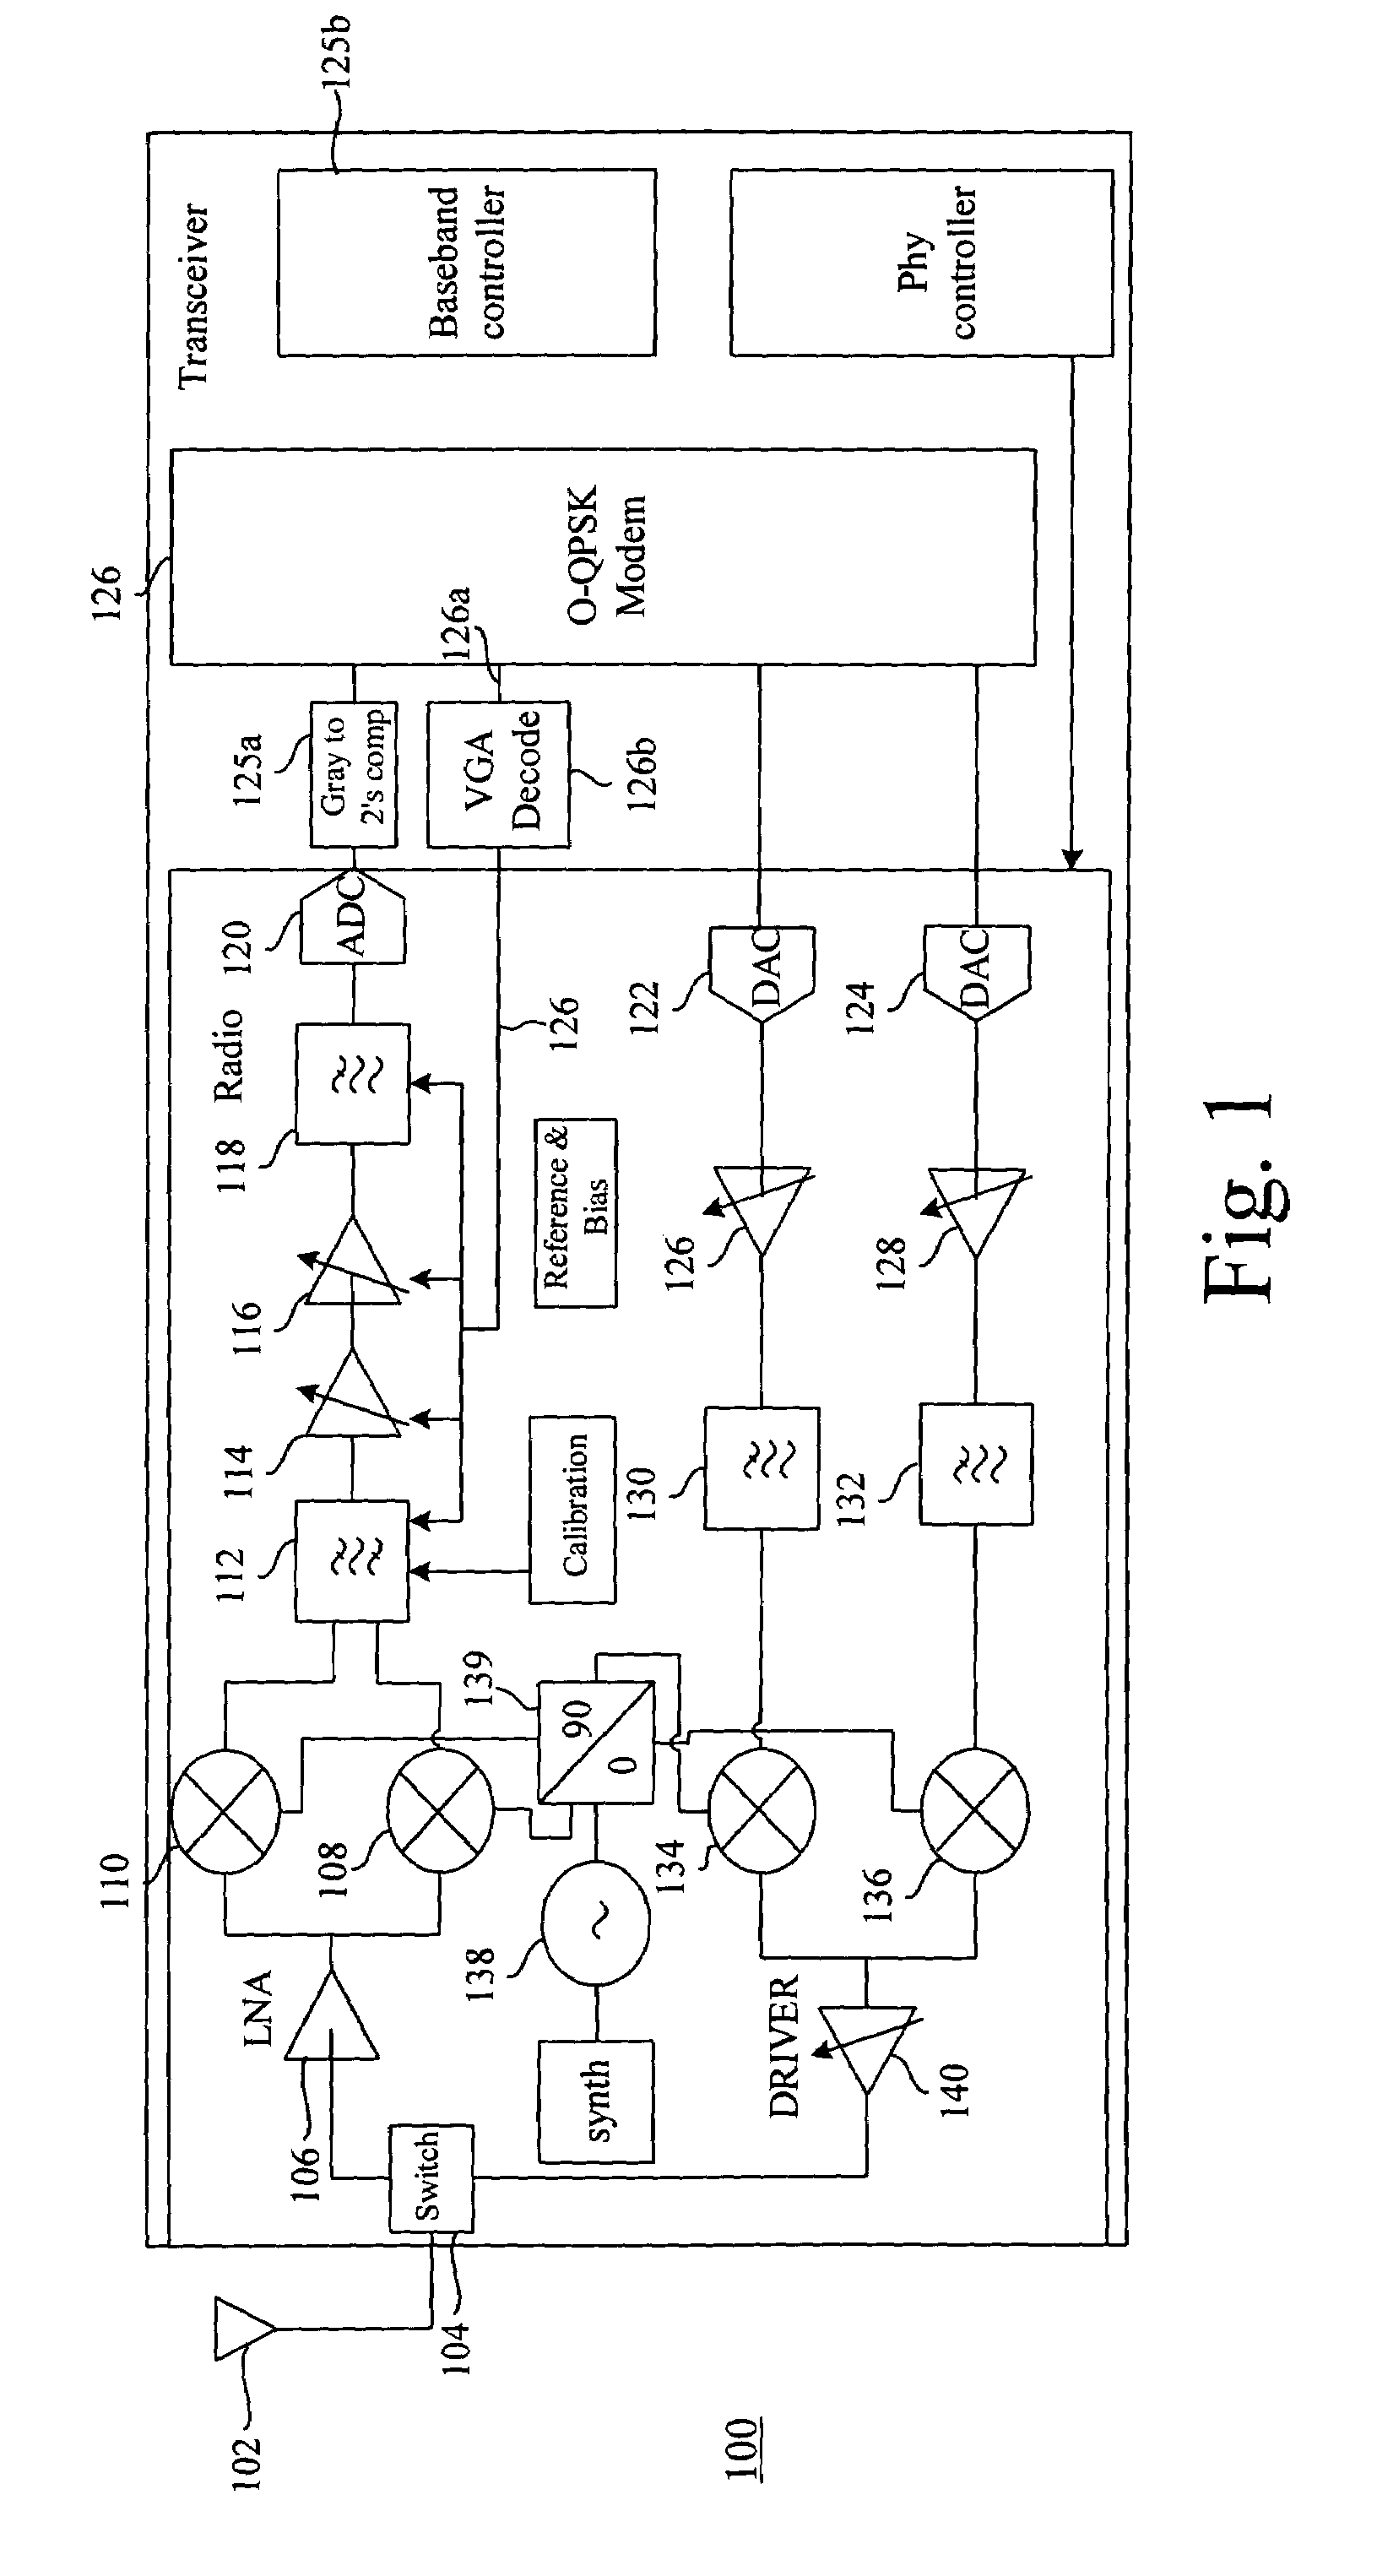 Radio receiver/transceiver including an interface circuit selectively operable in a current mode or a voltage mode